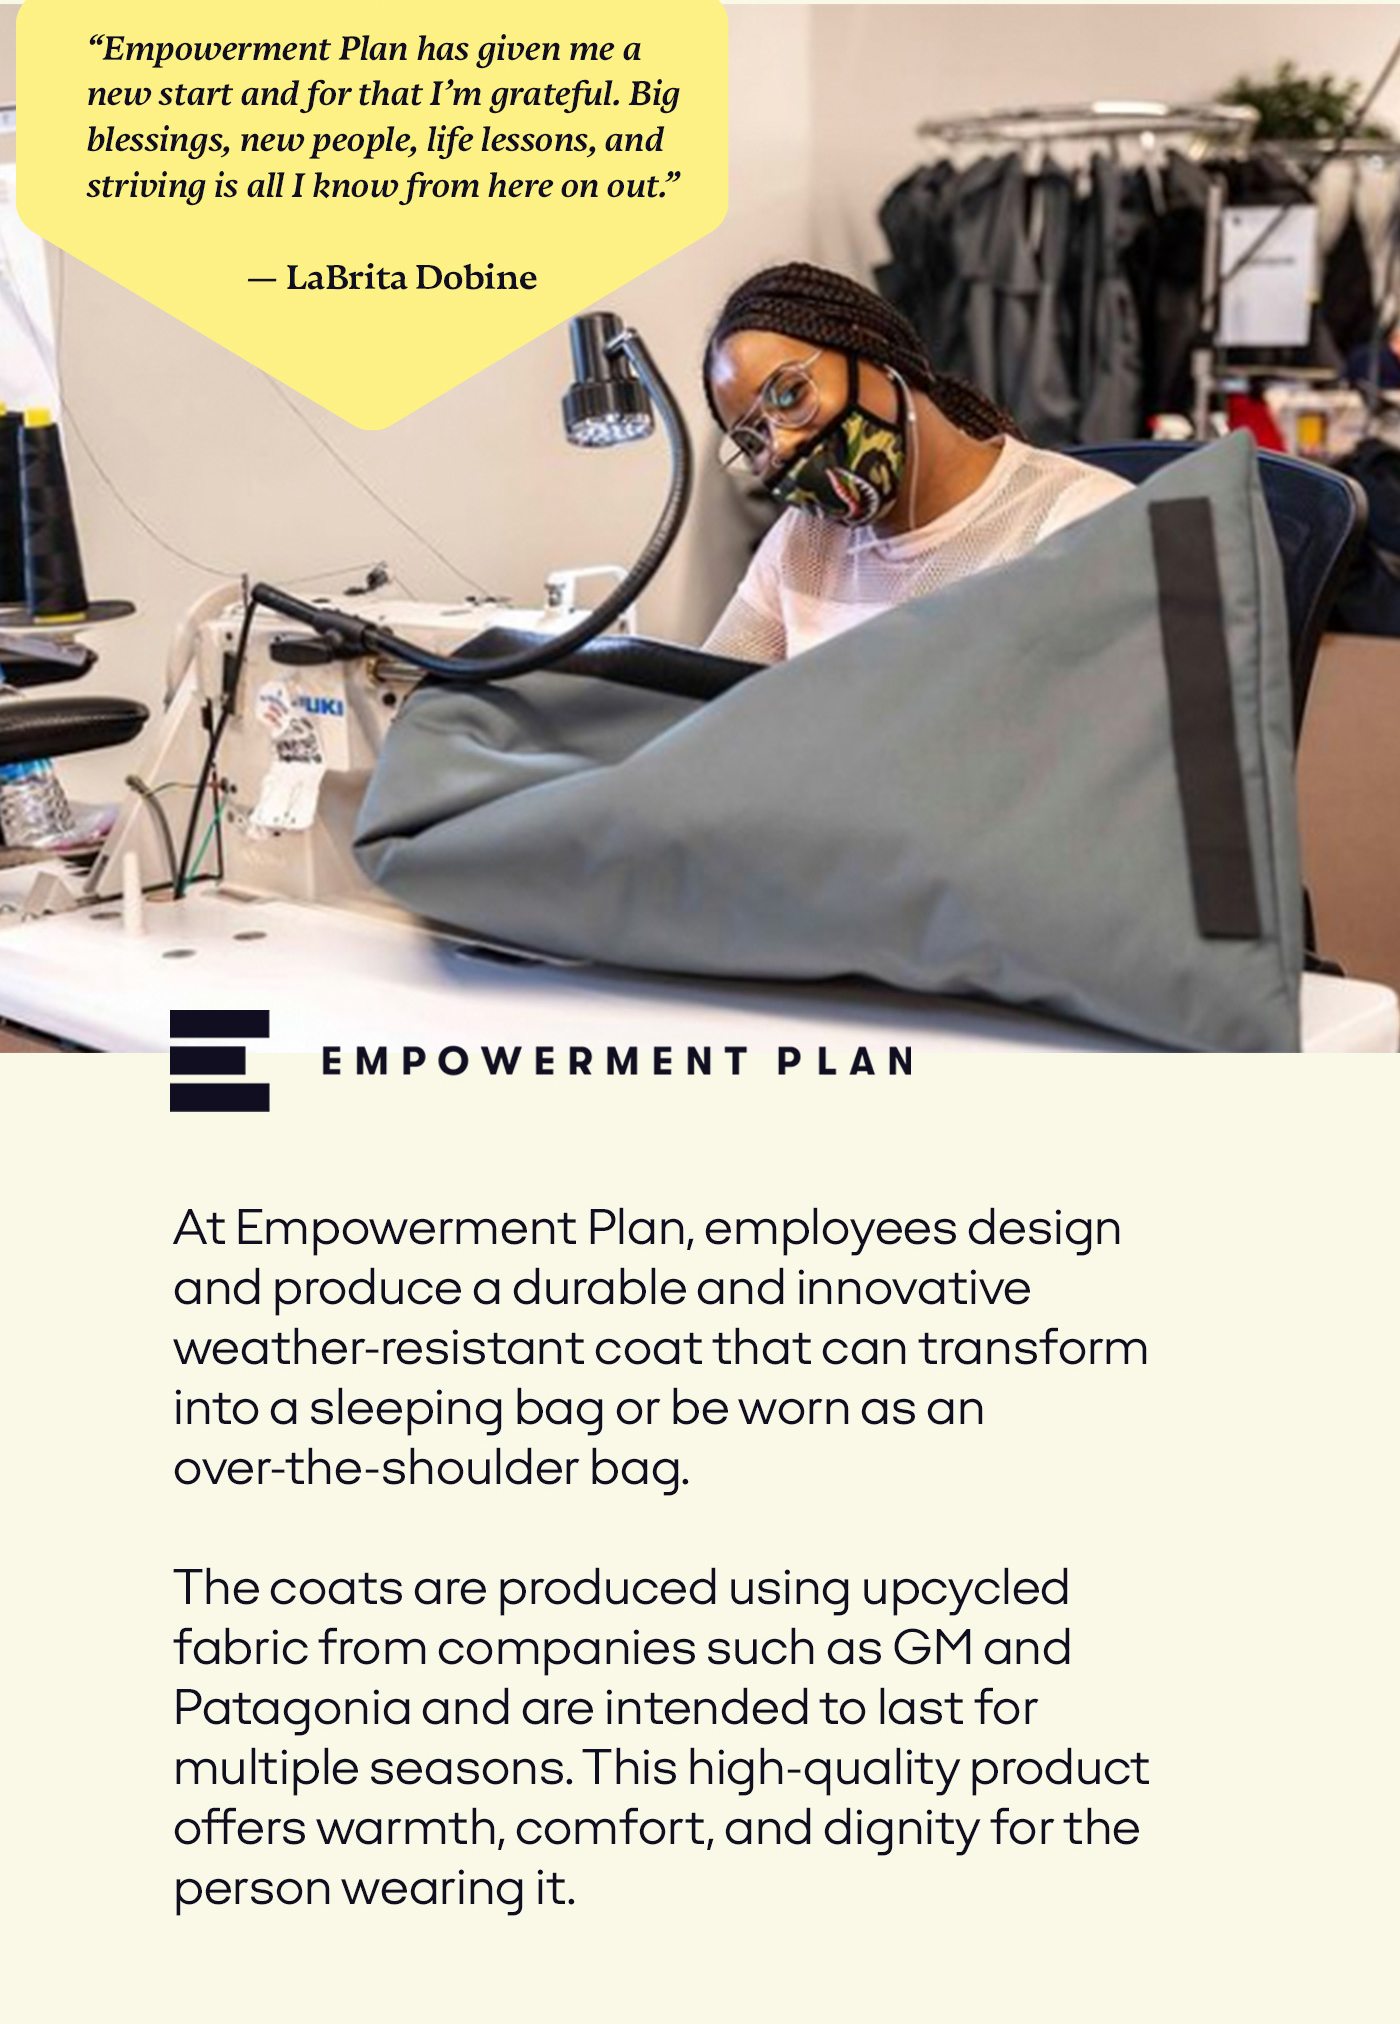 Empowerment Plan has given me a new start and for that I'm grateful. Big blessings, new people, life lessons, and striving is all I know from here on out. At Empowerment Plan, employees design and produce a durable and innovative weather-resistant EMPWR coat that can transform into a sleeping bag or be worn as an over-the-shoulder bag. The coats are produced using upcycled fabric from companies such as GM and Patagonia and are intended to last for multiple seasons. Offering a high-quality product, not only offers warmth and comfort, but also dignity for the person wearing it.